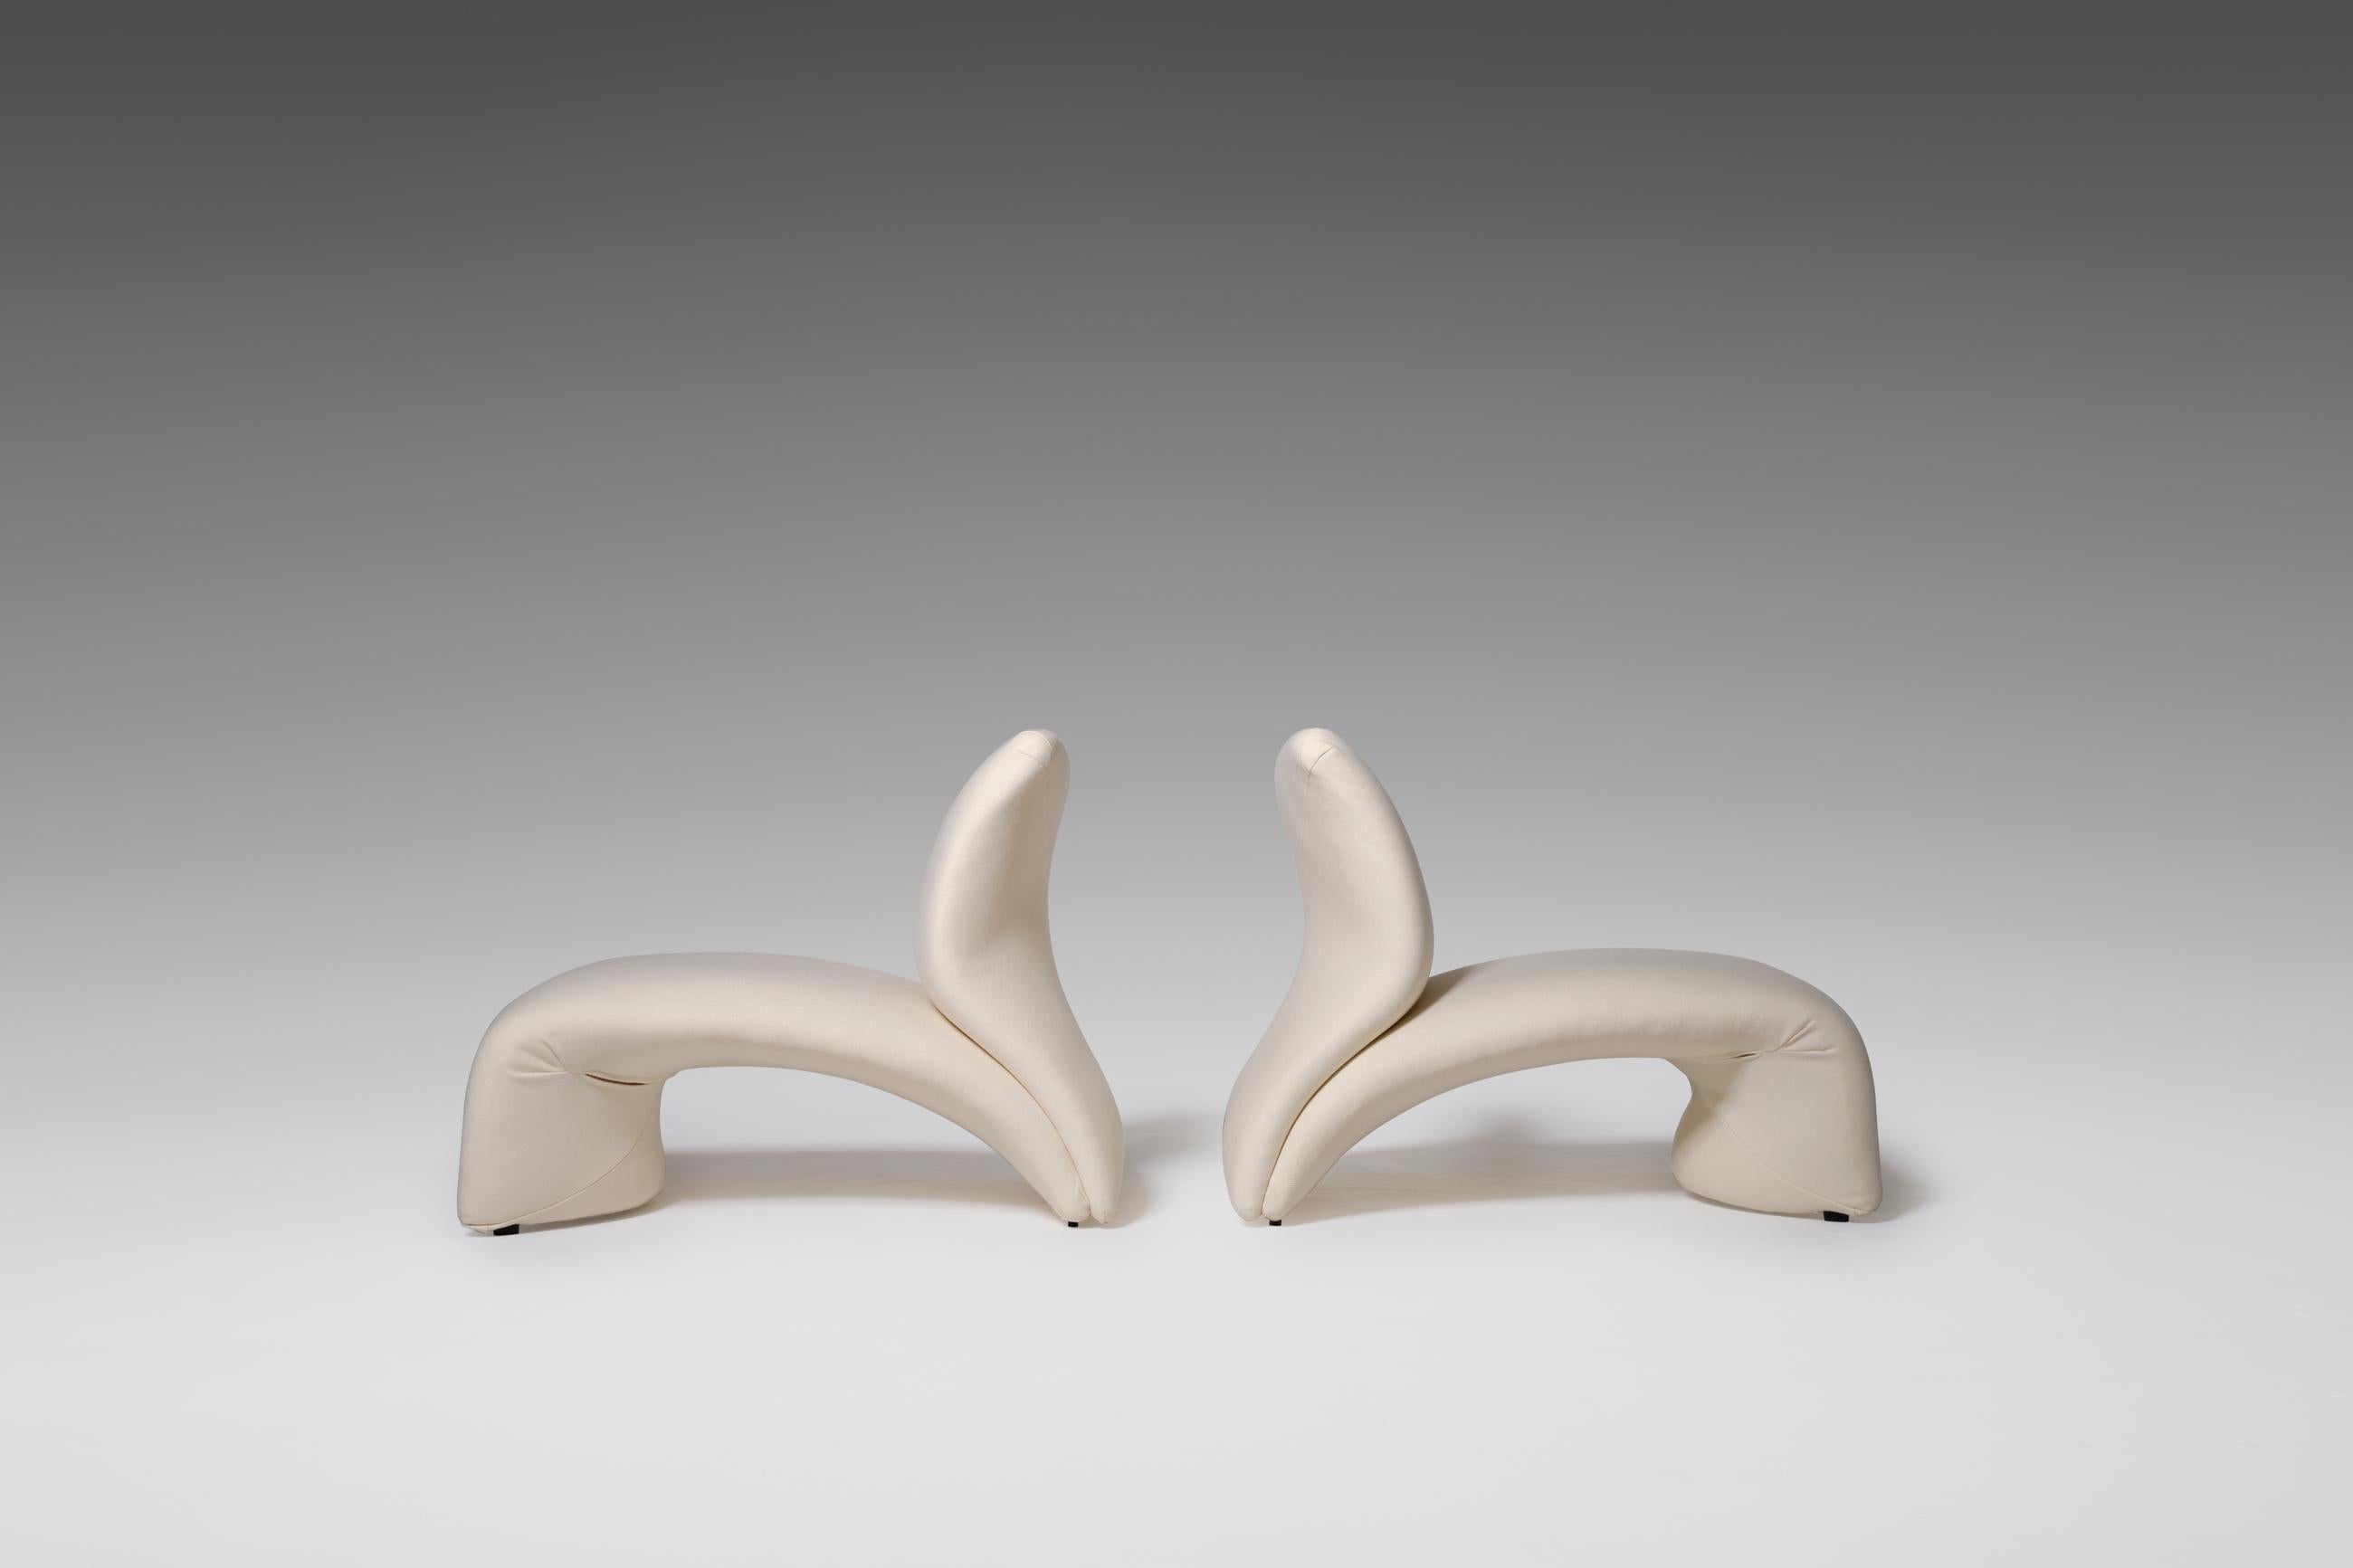 French Pair of ‘Kaïdo’ Lounge Chairs by Kwok Hoï Chan for Steiner, 1968 For Sale